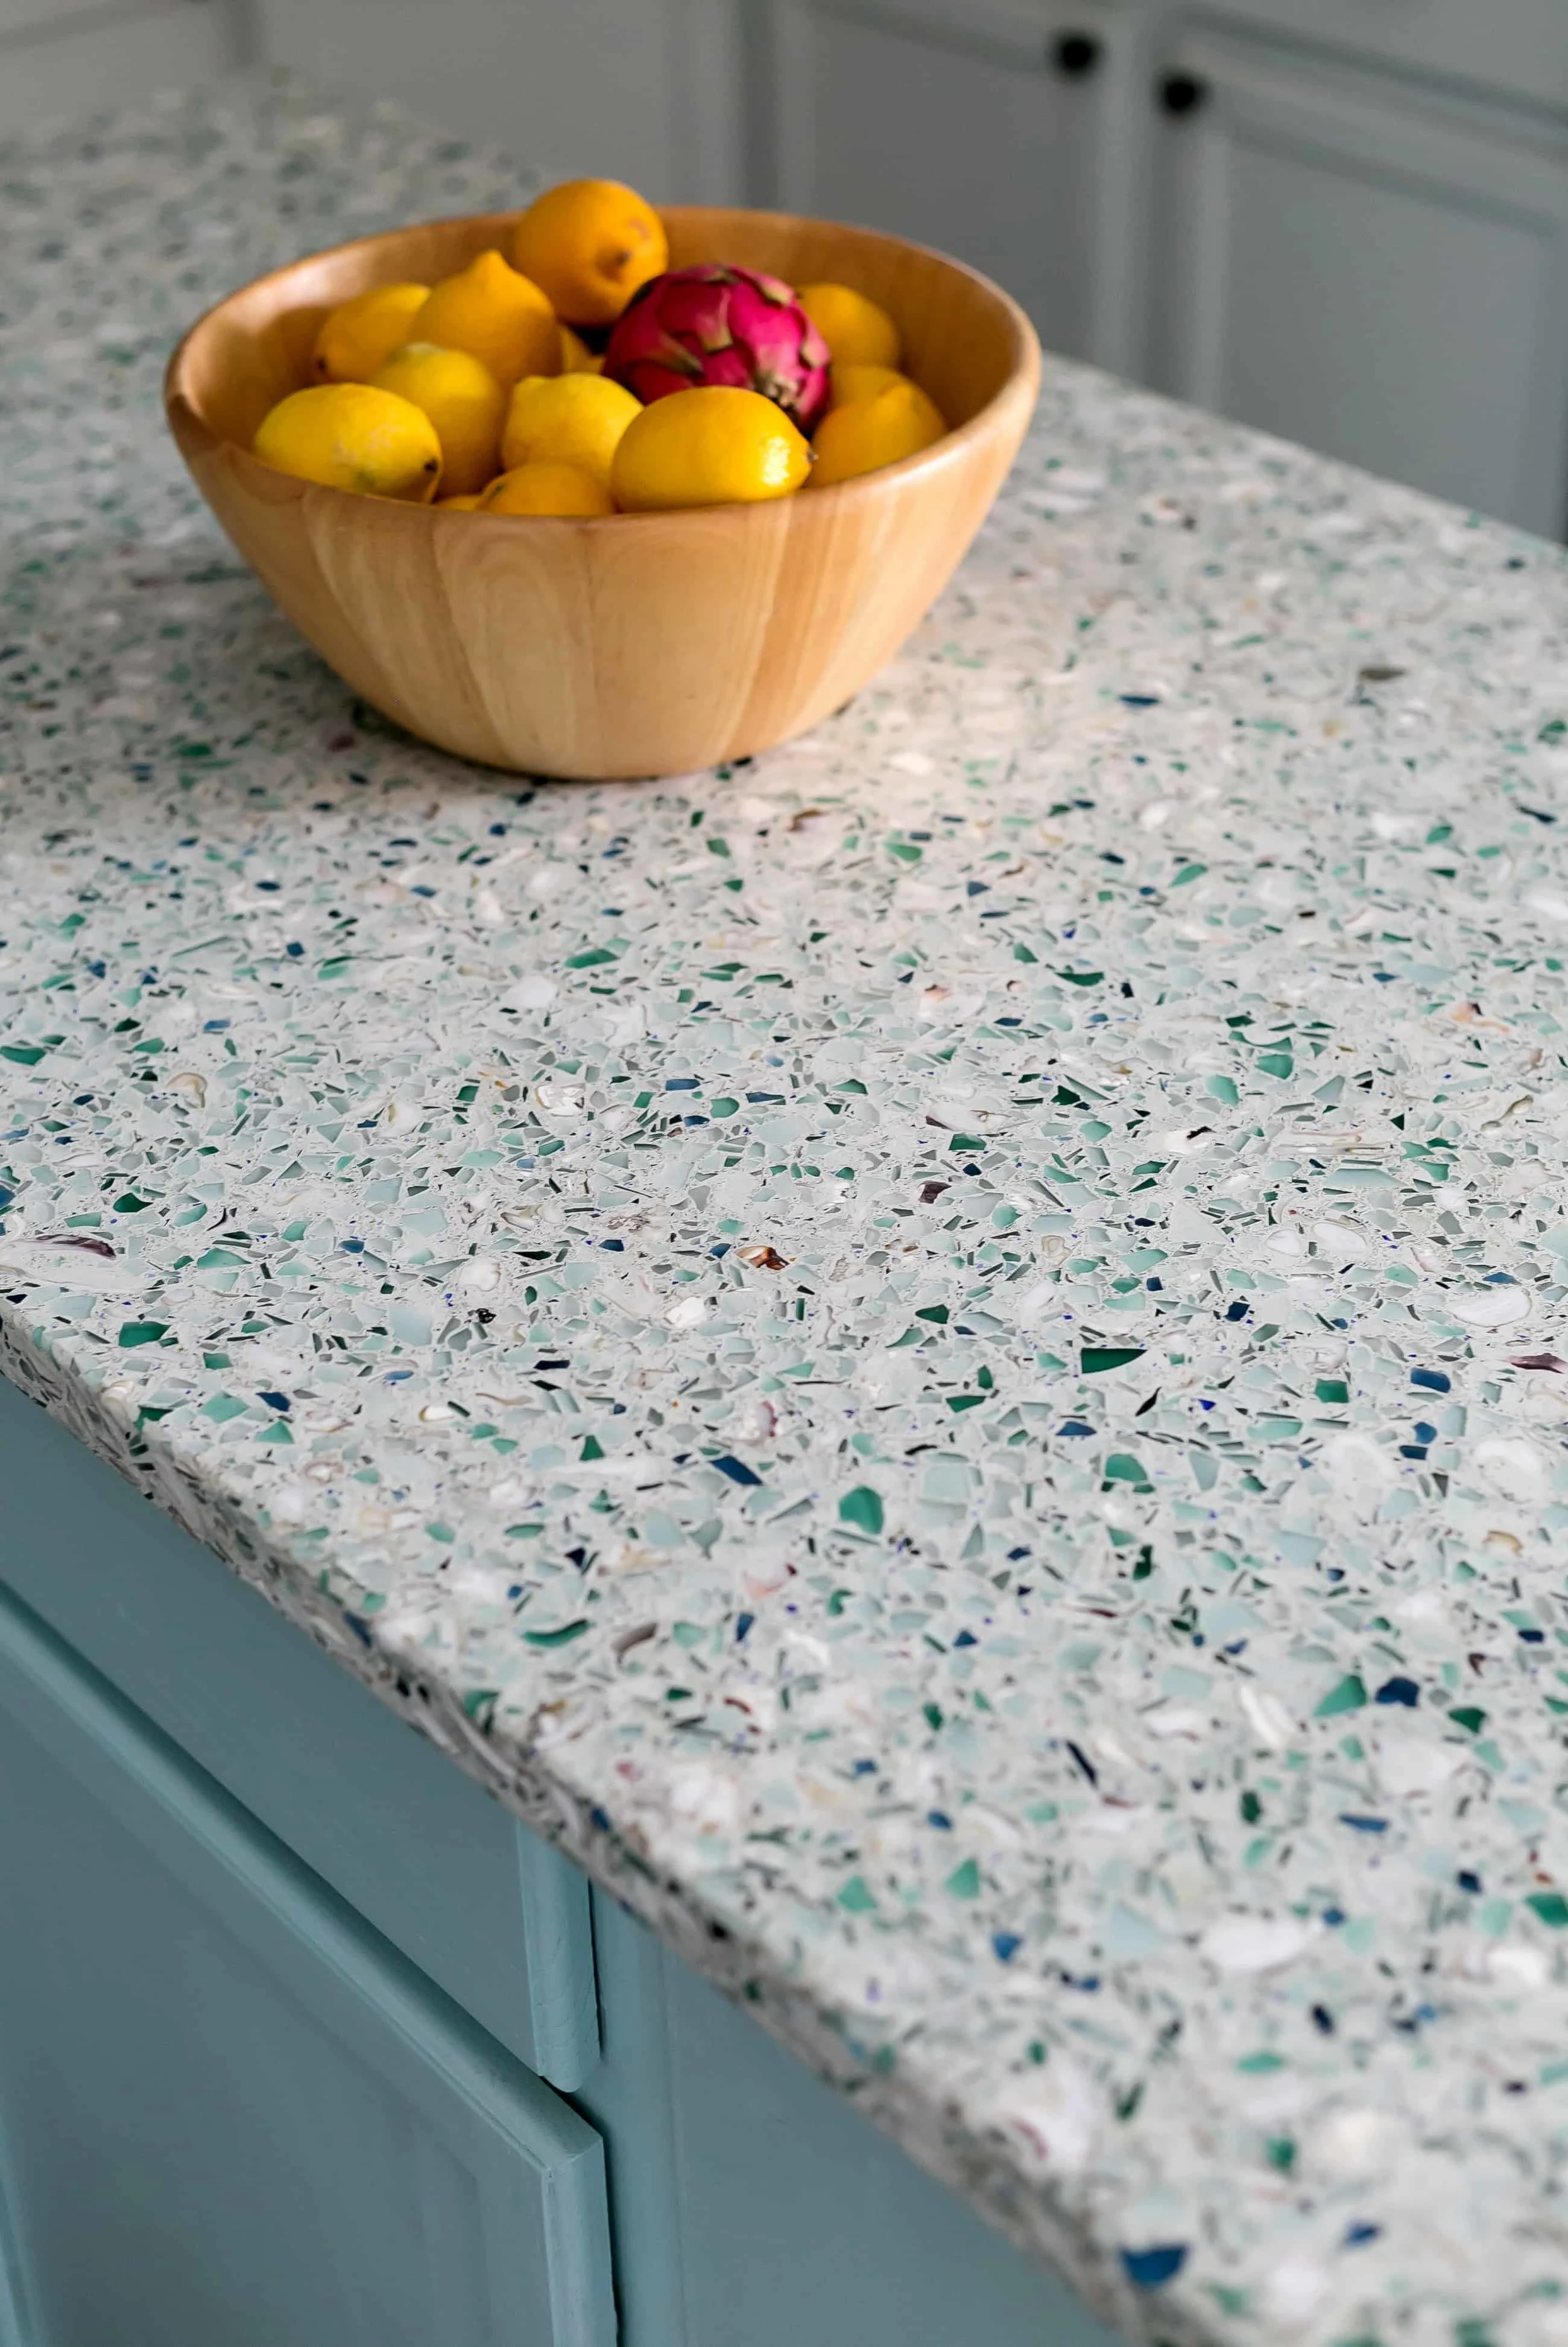 Recycled Glass Countertops